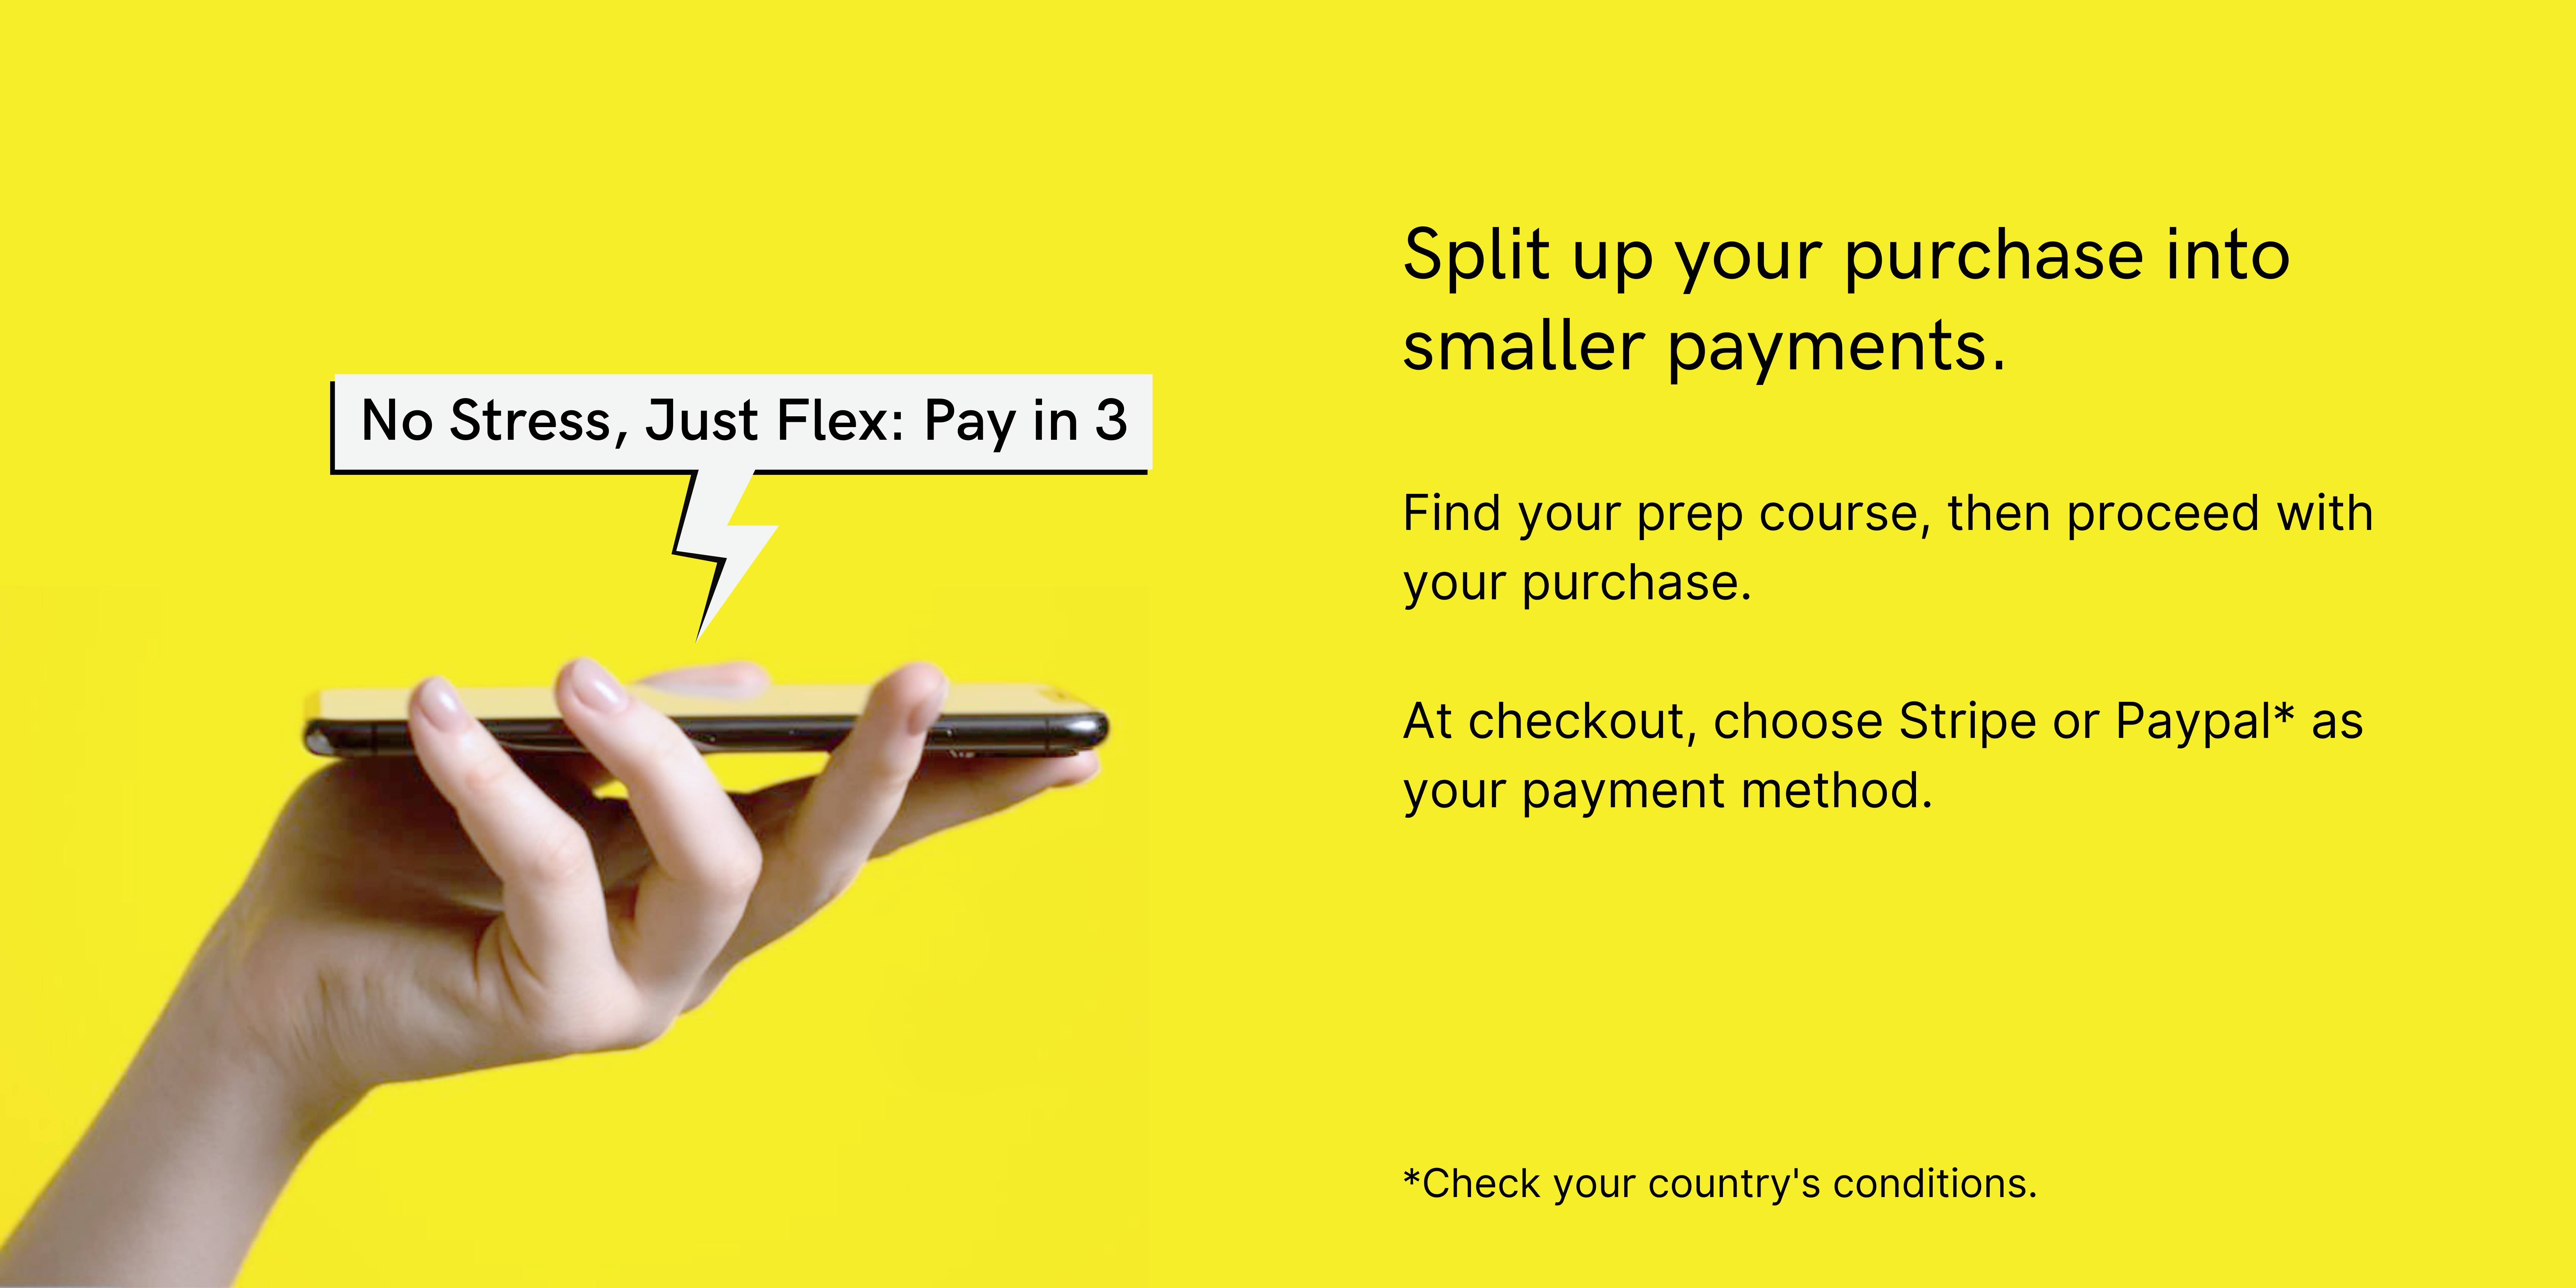 Finance your prep: pay in 3